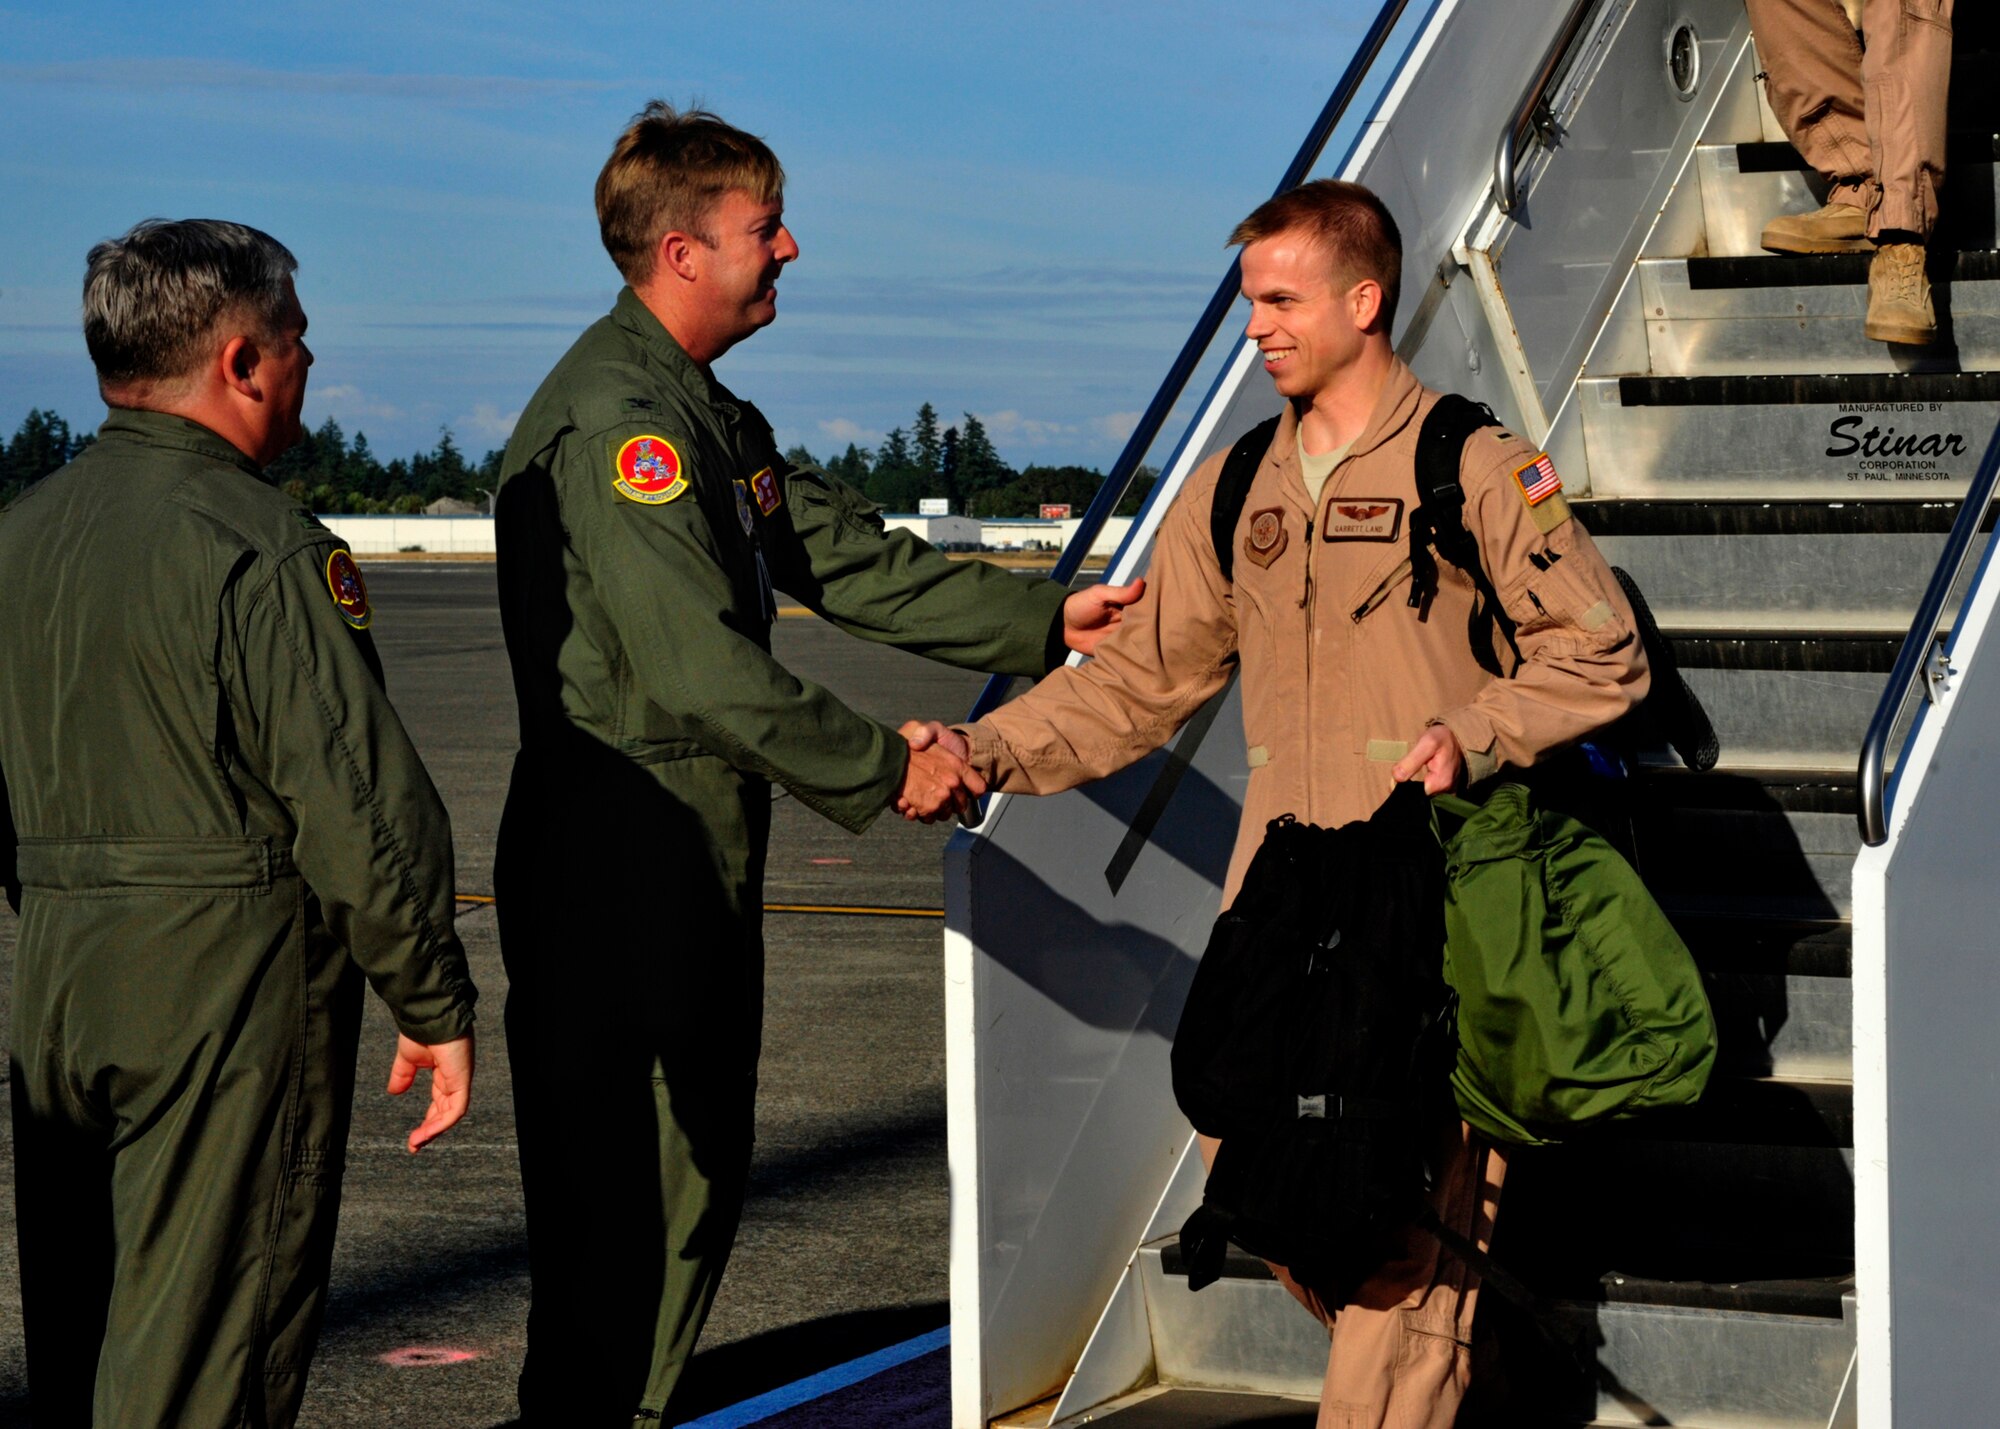 Col. R. Wyn Elder, 62nd Airlift Wing commander, greets 1st Lt. Garrett Land, 10th Airlift Squadron, Sept. 1, 2011, during a redeployment at Joint Base Lewis-McChord, Wash. The 10th AS completed a 120-day deployment in support of Operations Enduring Freedom and New Dawn. (U.S. Air Force Photo/Staff Sgt. Frances Kriss)